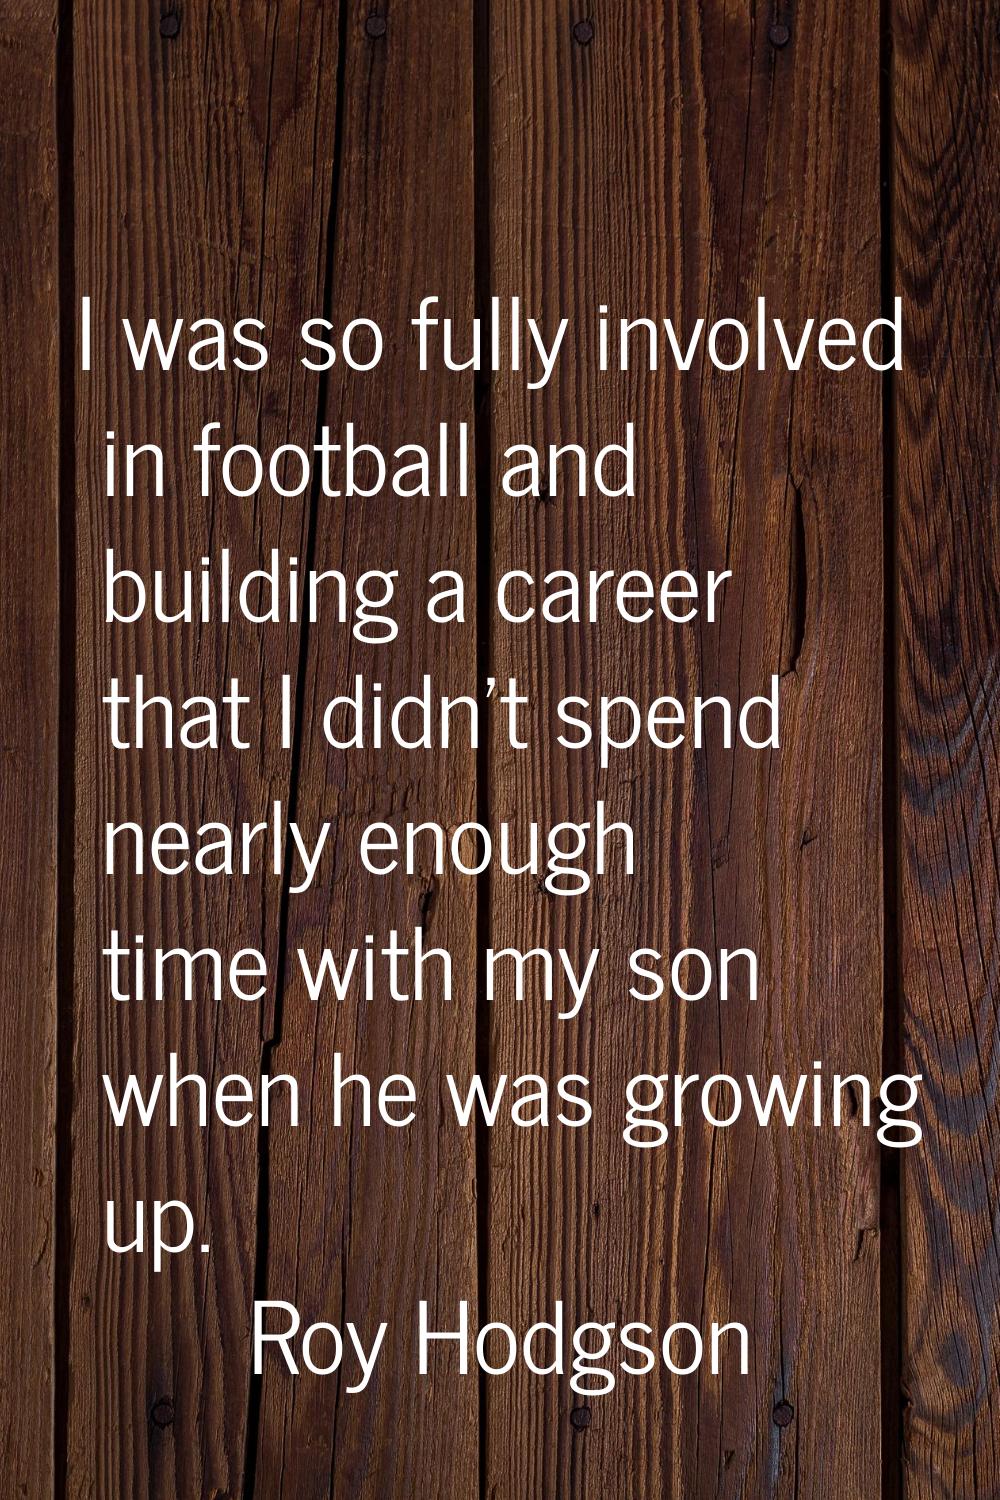 I was so fully involved in football and building a career that I didn't spend nearly enough time wi